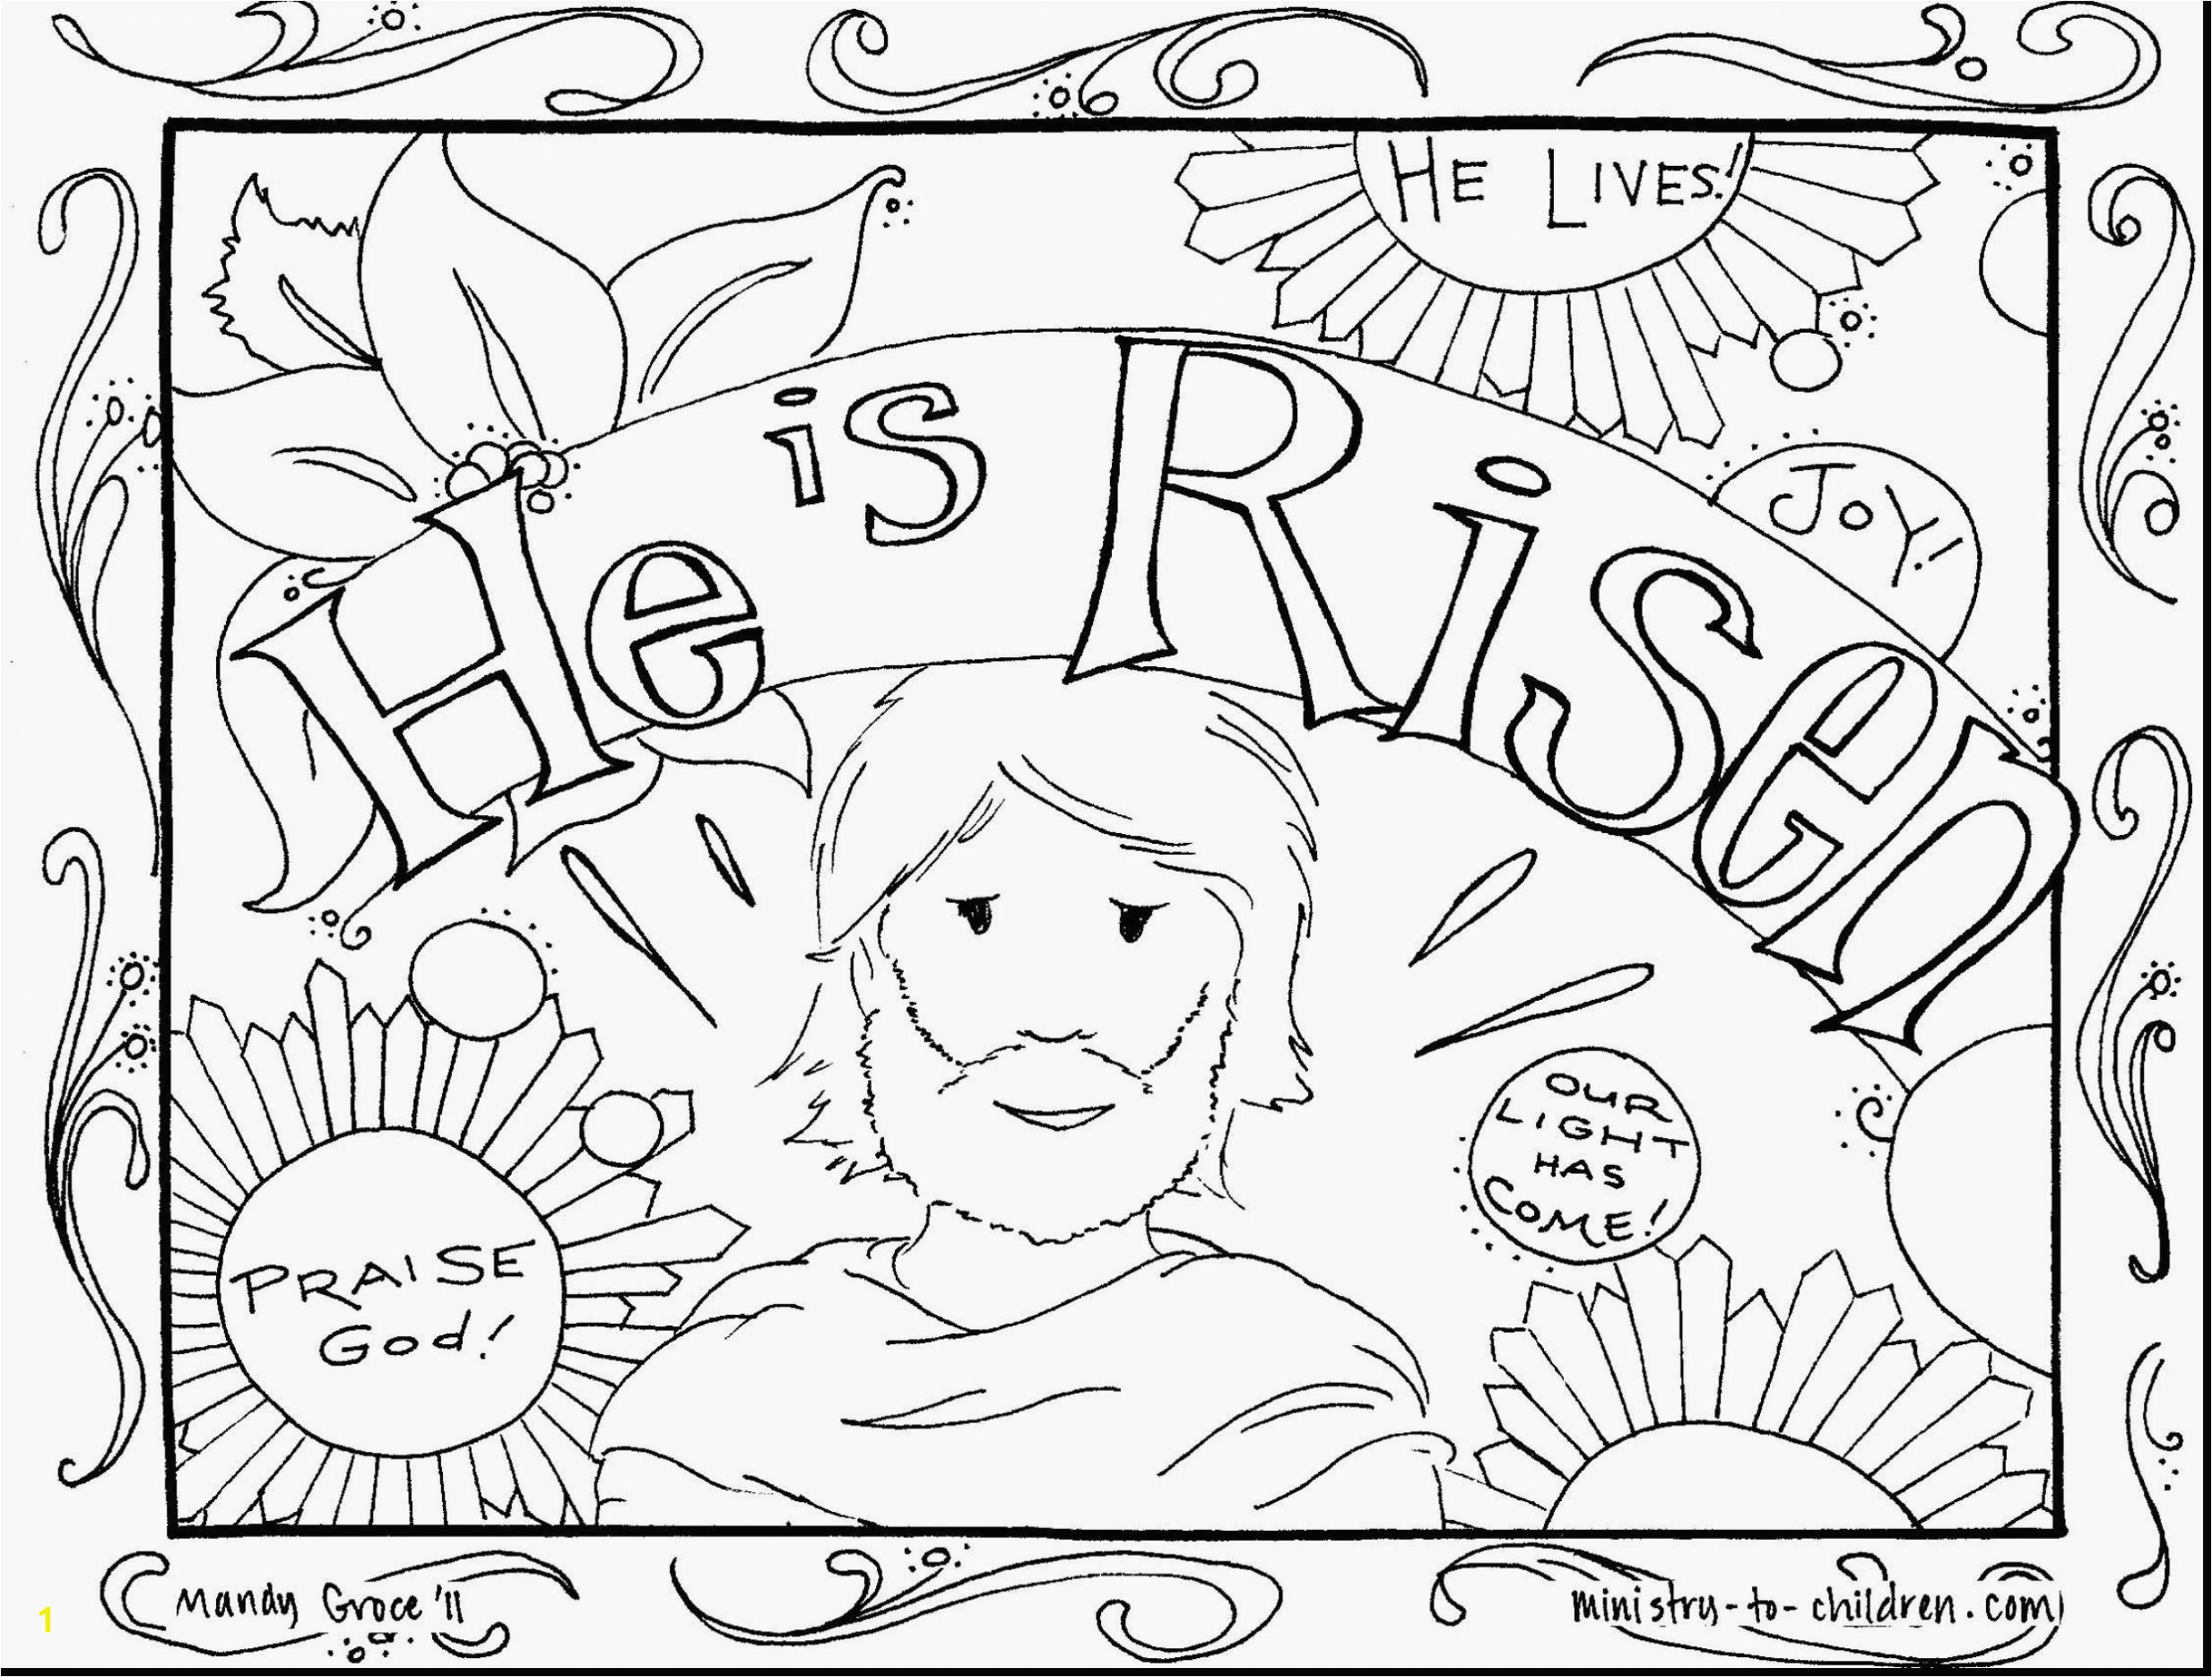 Jesus with Children Coloring Page Best Coloring Easter Pages to Print Out Lovely Preschool